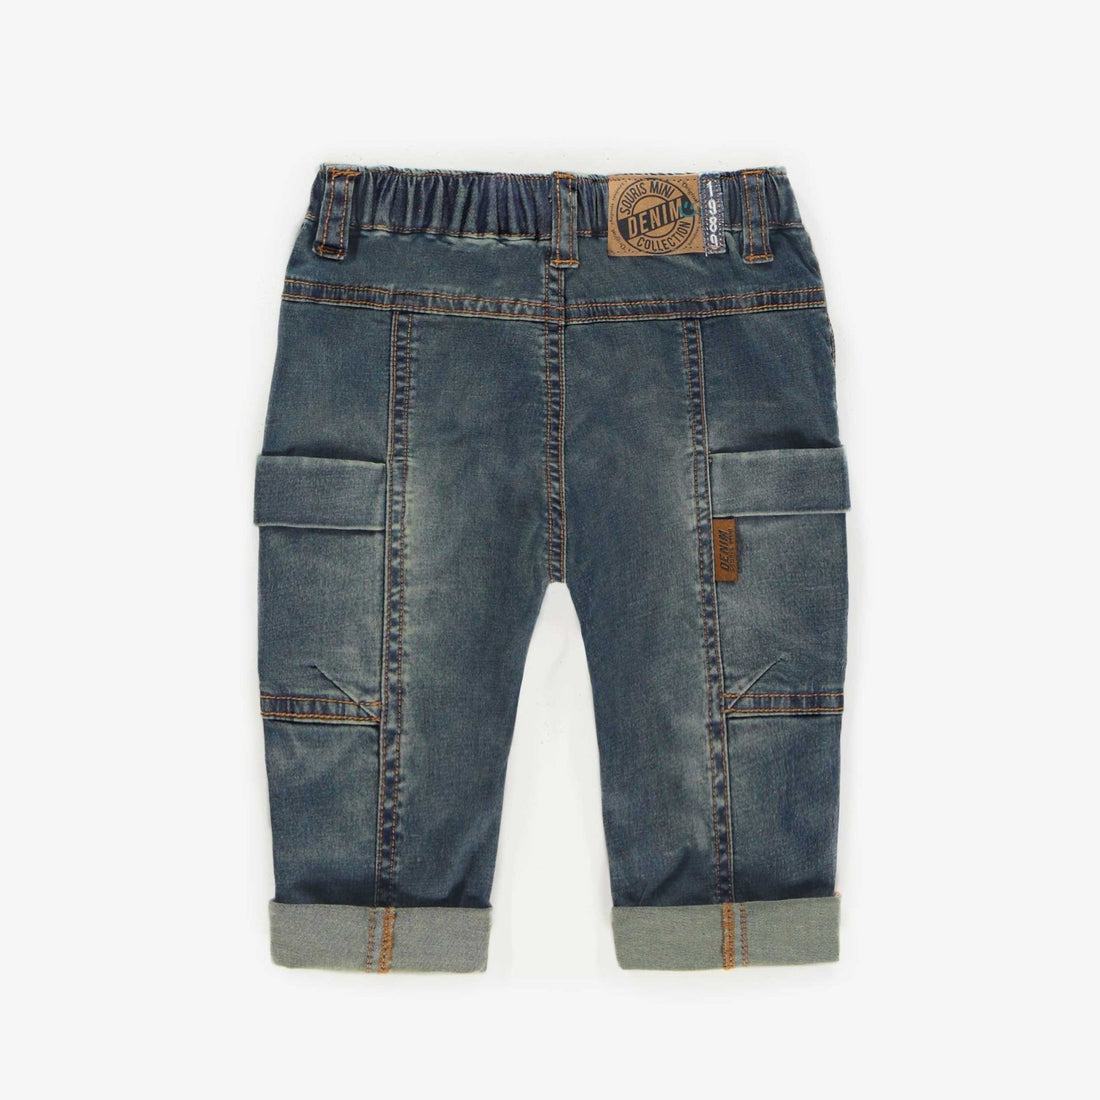 RELAXED FIT PANTS IN LIGHT DARK DENIM, BABY